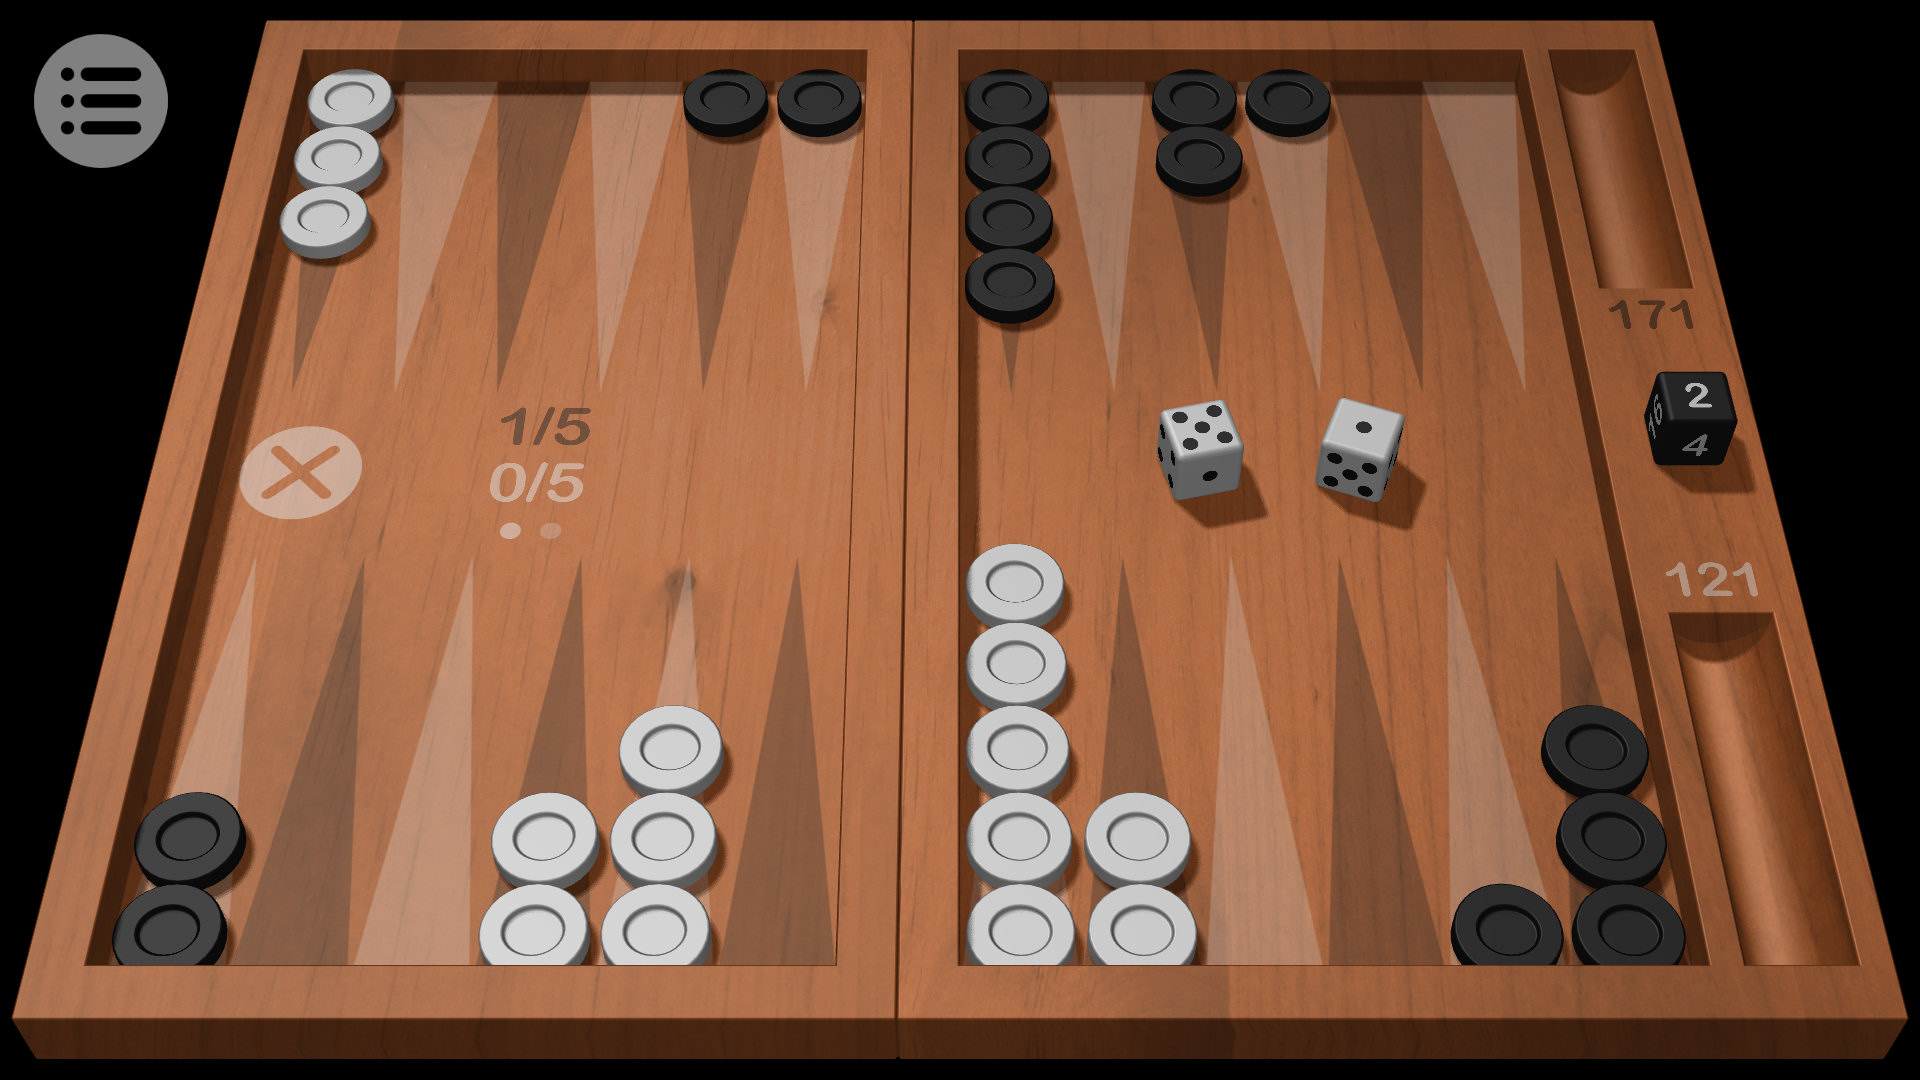 Backgammon Arena instal the new version for ios